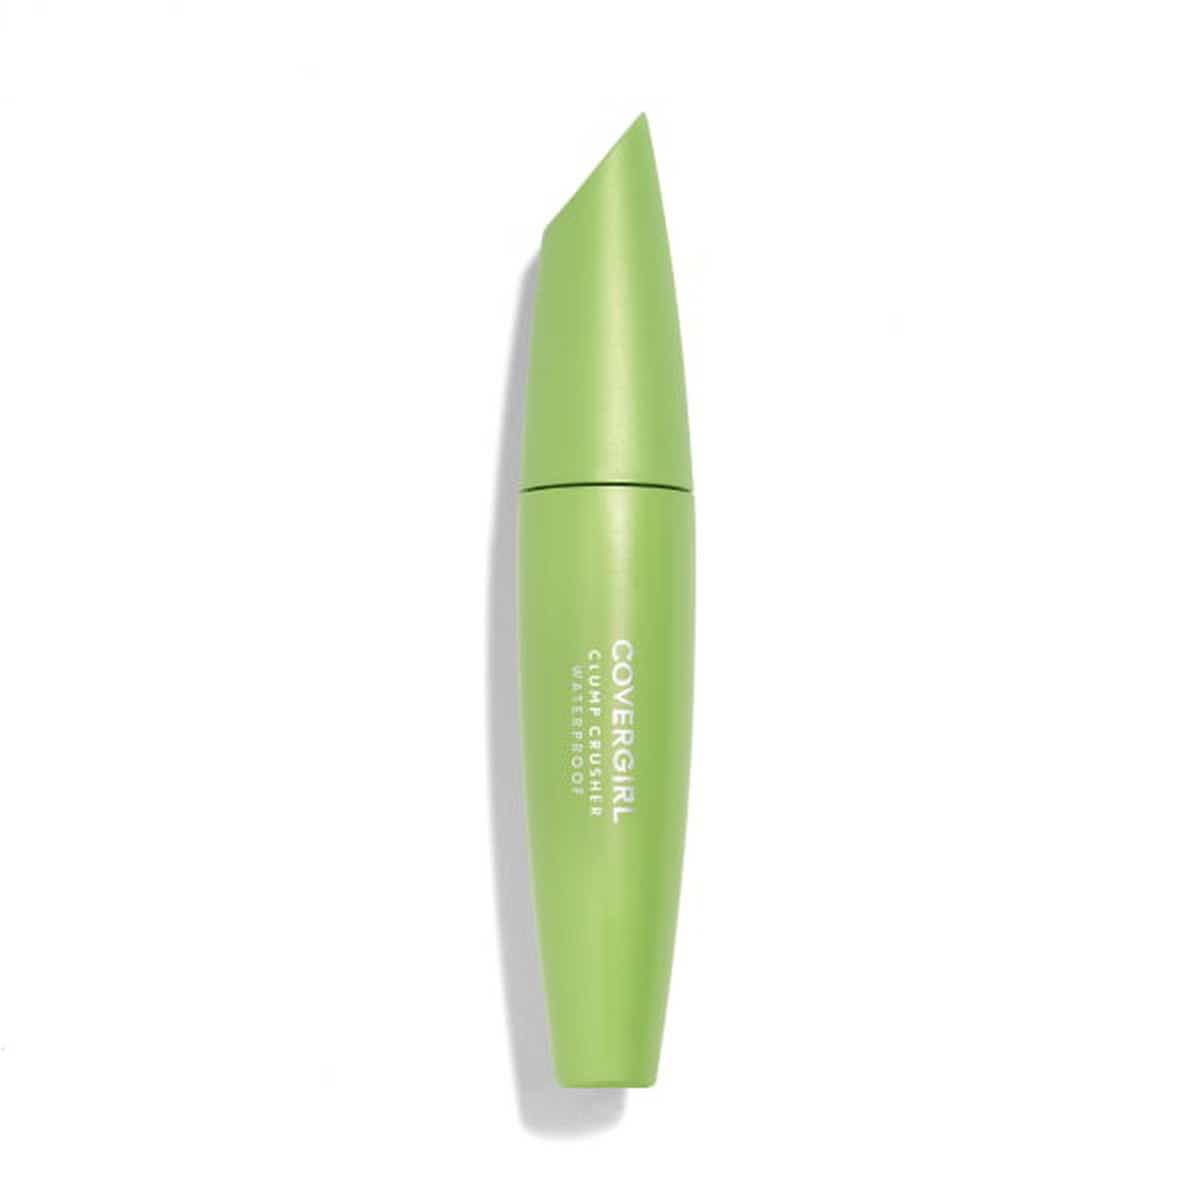 Clump Crusher Water Resistant Mascara By LashBlast